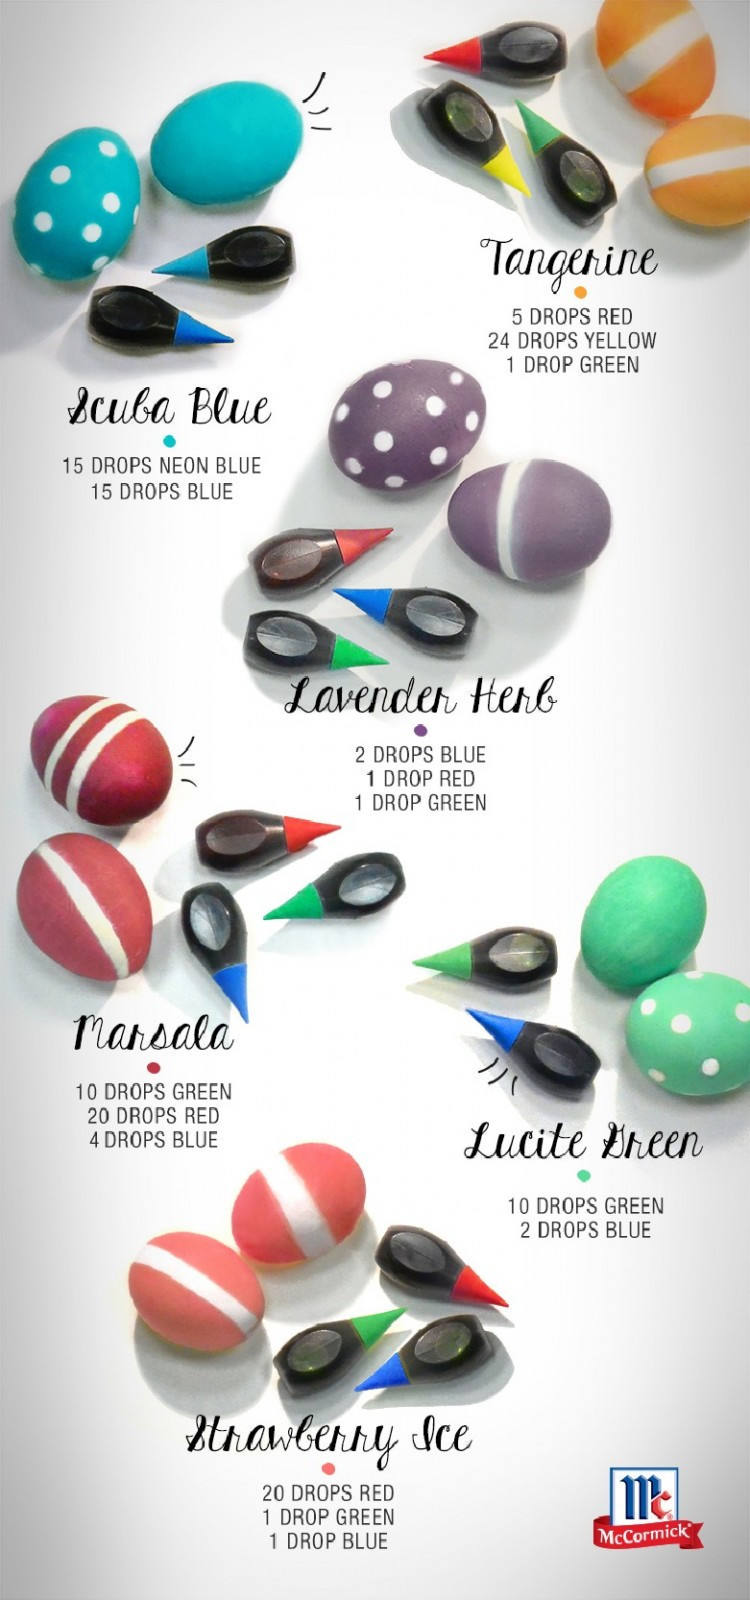 Easter Eggs With Food Coloring
 How to Dye Easter Eggs with Food Coloring Instead of Kits